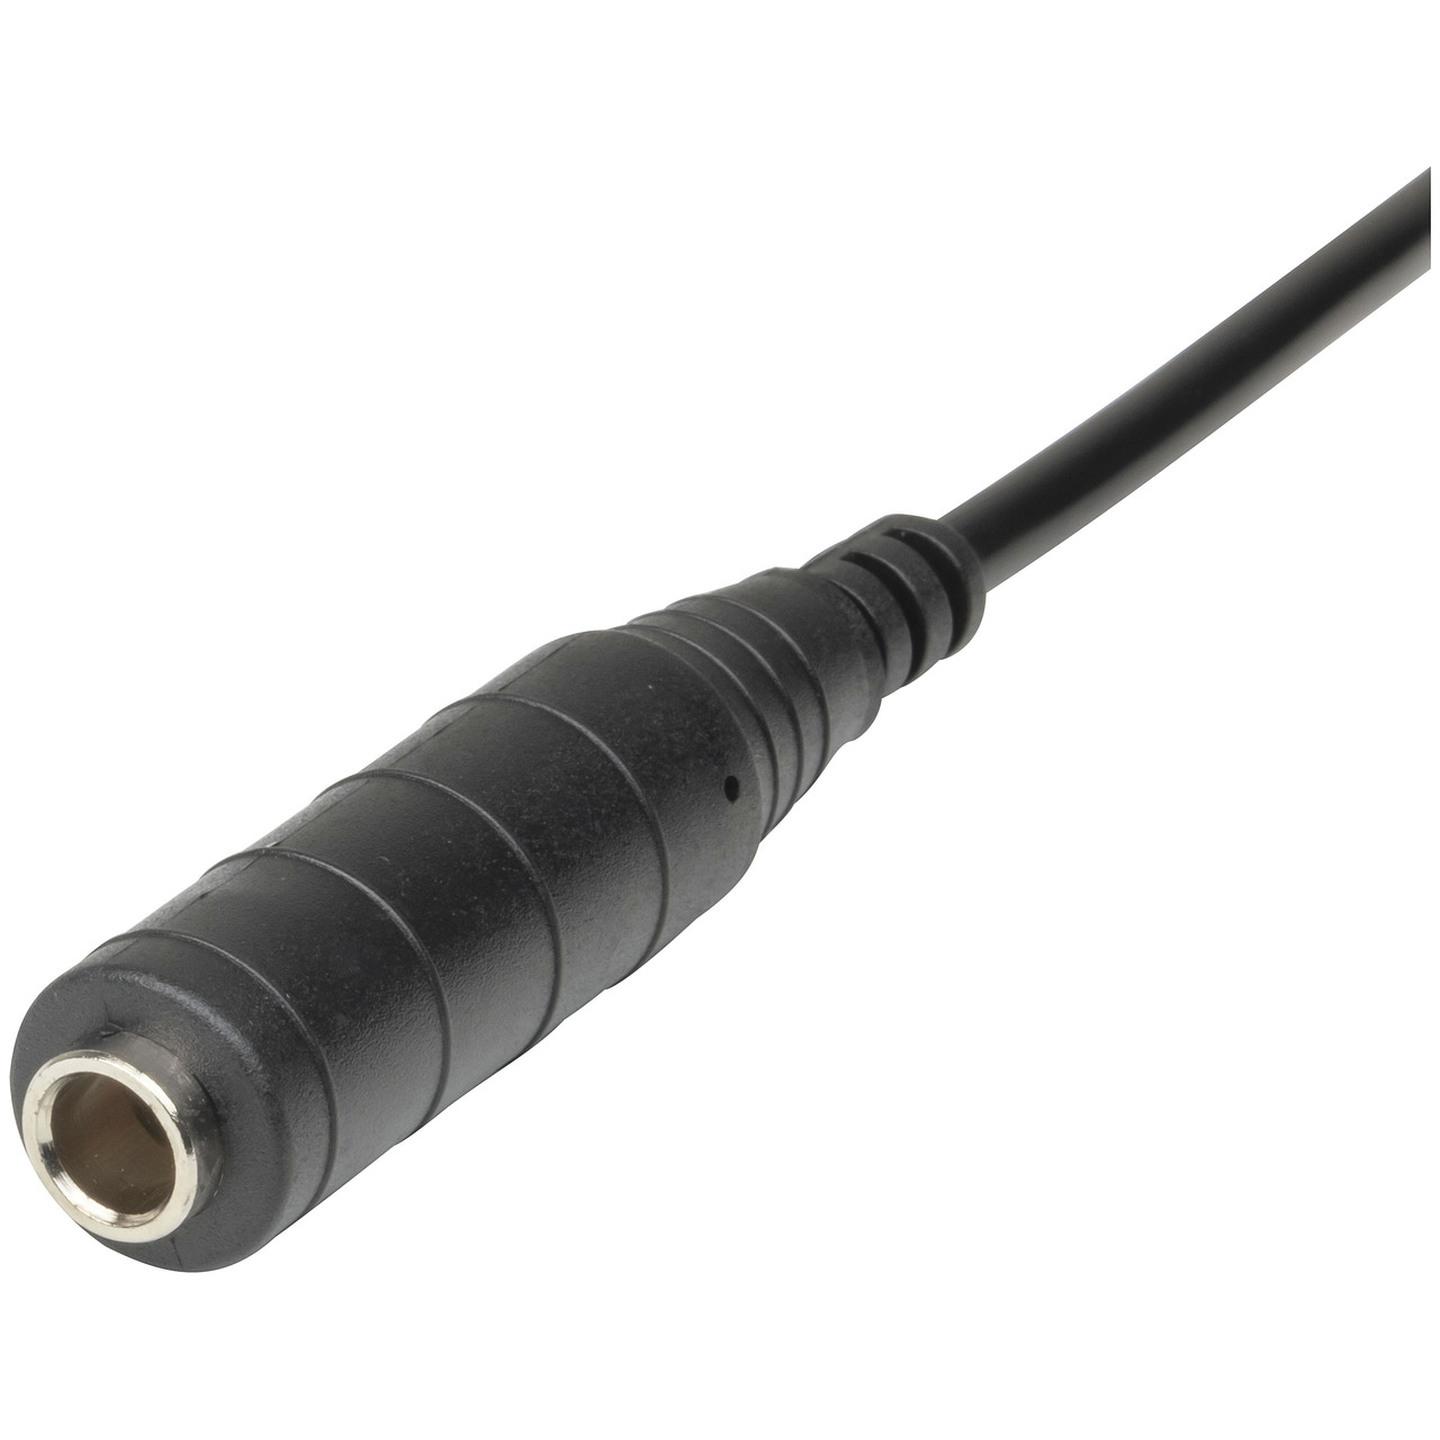 6.5mm Stereo Plug to 6.5mm Stereo Socket Curly Cable - 6m